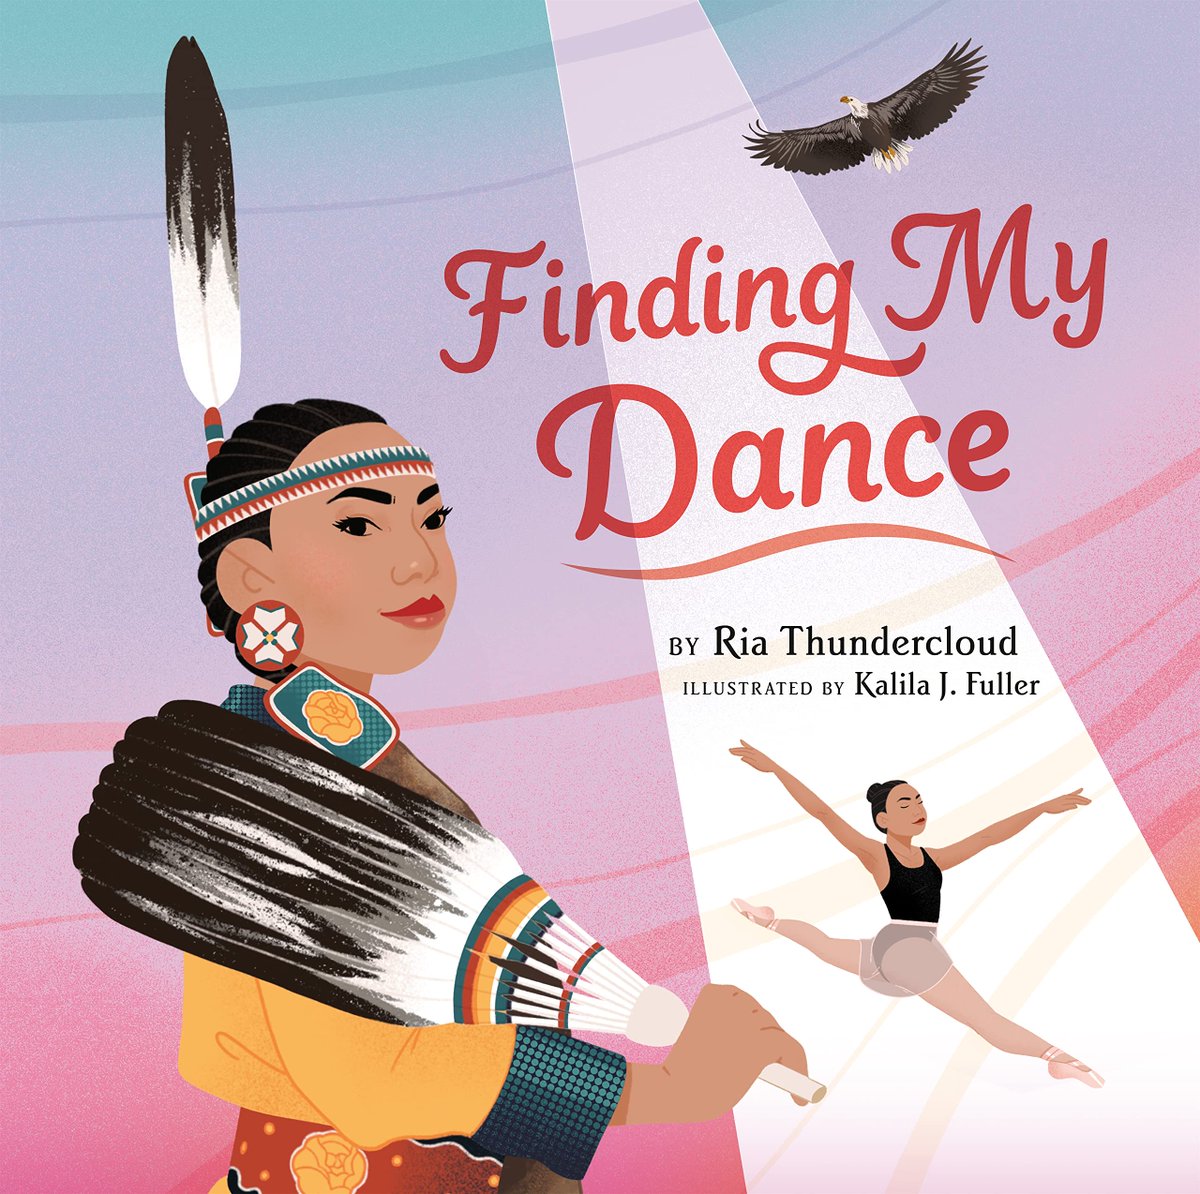 <a target='_blank' href='https://t.co/xkwaayXOTL'>https://t.co/xkwaayXOTL</a> Dancing with traditions book being read by the author !! <a target='_blank' href='http://search.twitter.com/search?q=CrayolaCreativityWeek'><a target='_blank' href='https://twitter.com/hashtag/CrayolaCreativityWeek?src=hash'>#CrayolaCreativityWeek</a></a> <a target='_blank' href='https://t.co/JQ22rcTEfE'>https://t.co/JQ22rcTEfE</a>